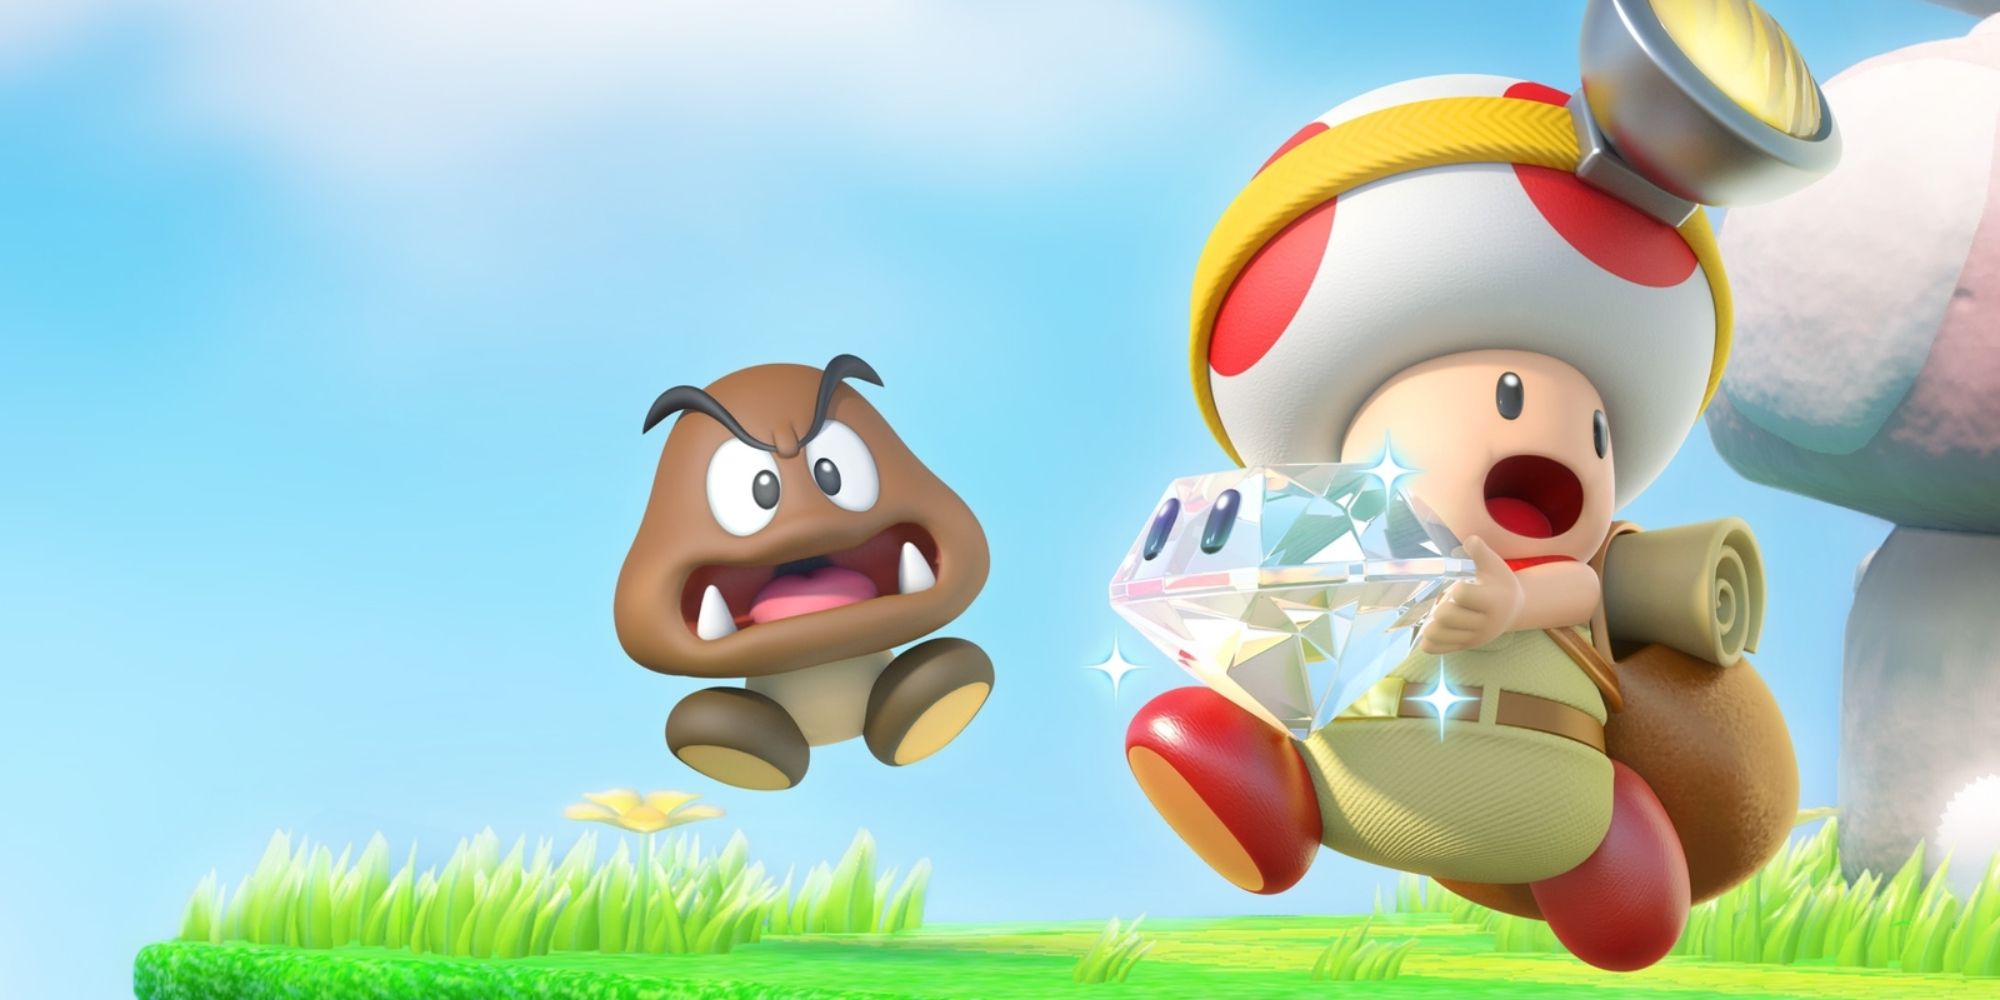 Captain Toad carrying a diamond past a Goomba